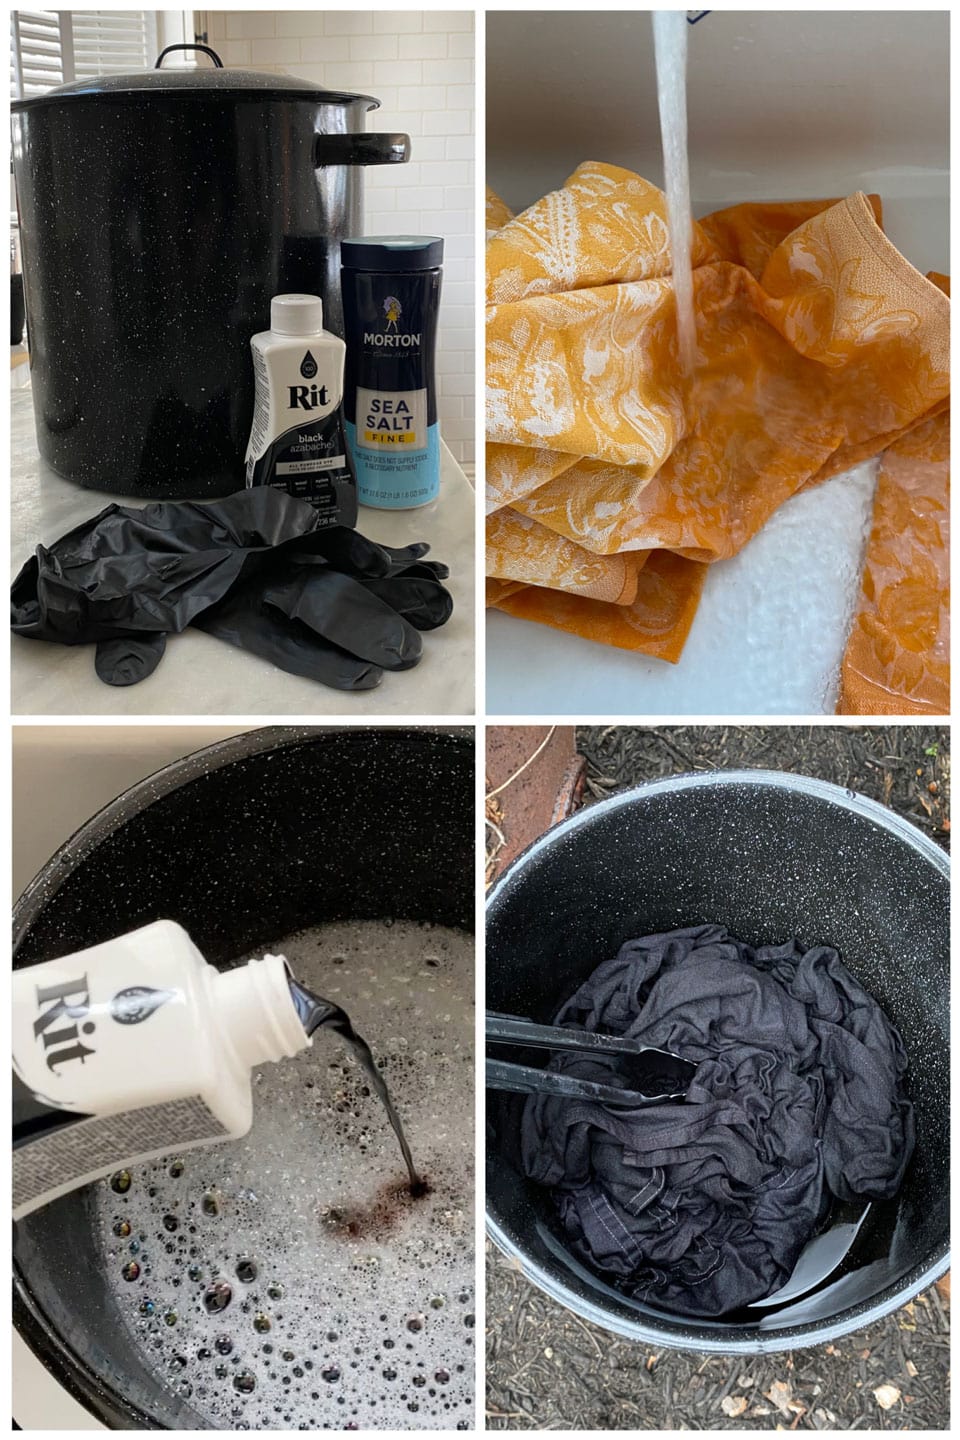 Lifestyle blogger Annie Diamond shares how she dyed some 30 year old napkins using black RIT dye